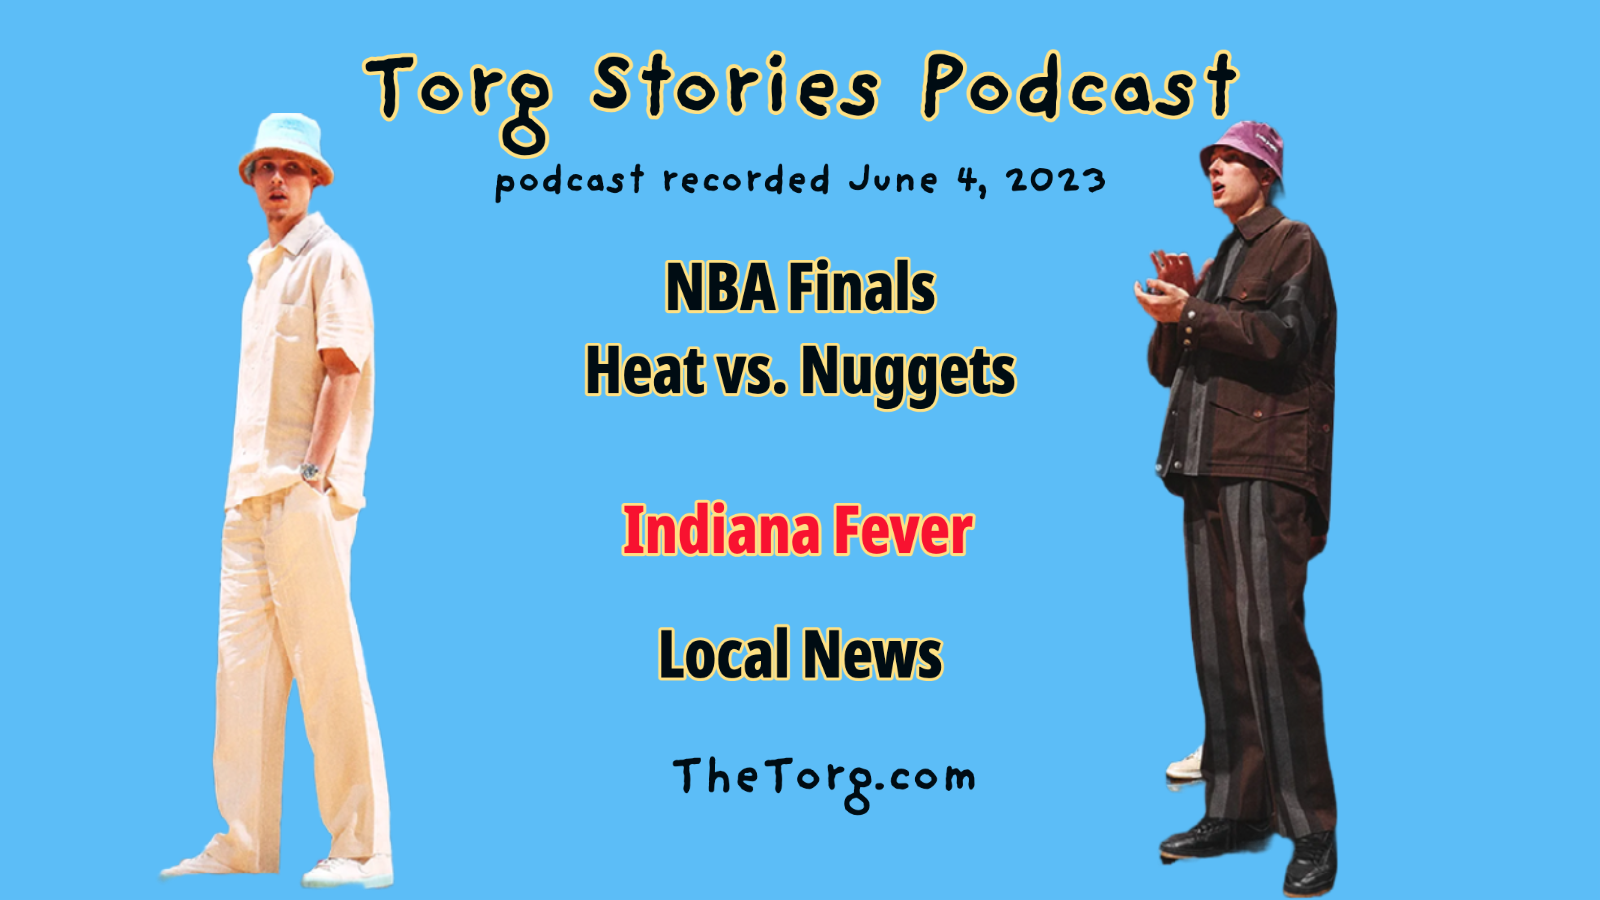 NBA Finals Heat and Nuggets, Meet the Indiana Fever, and Local News